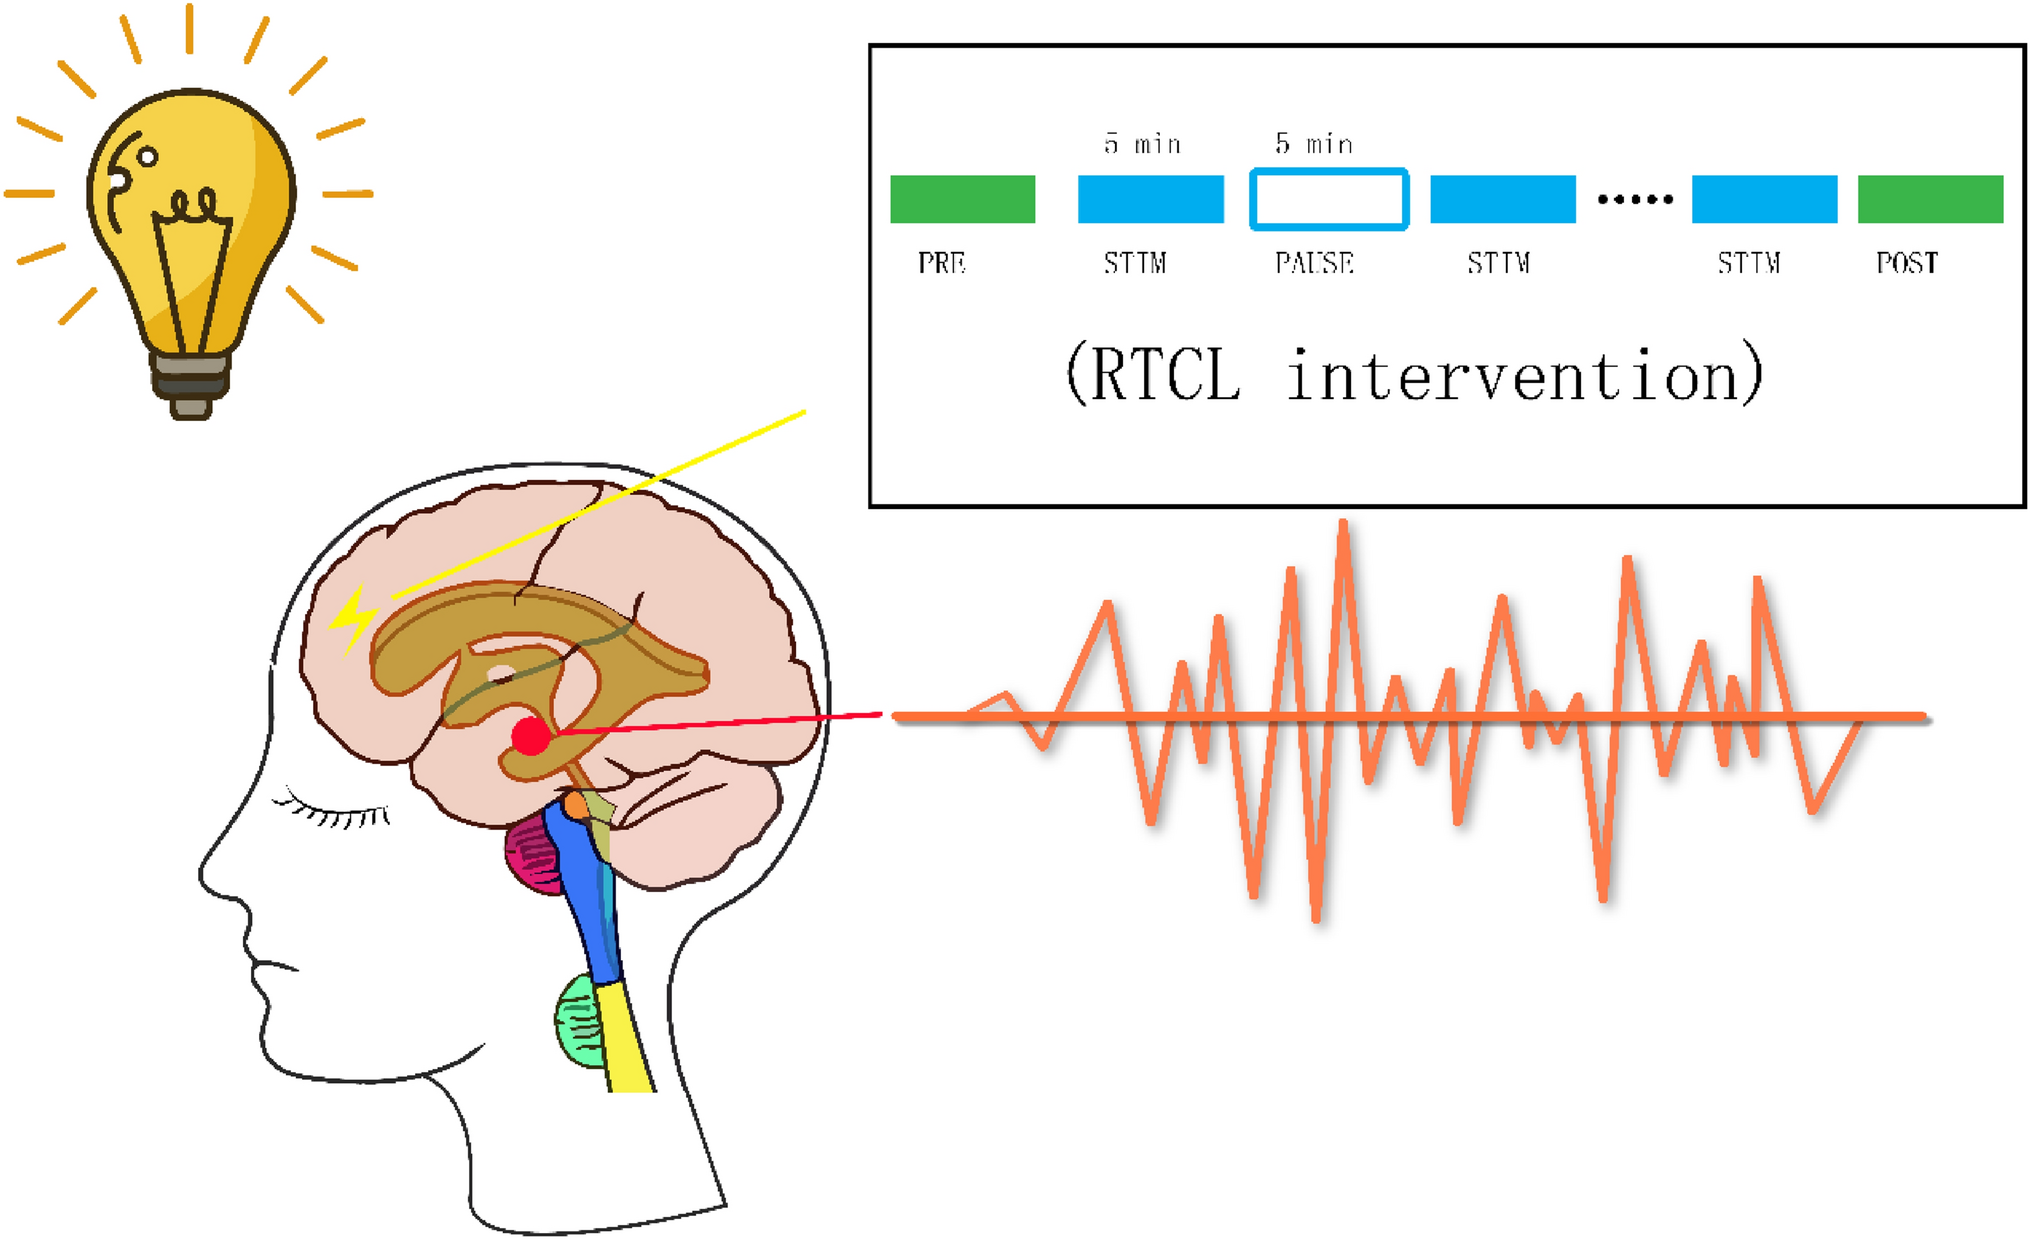 Waking Up Brain with Electrical Stimulation to Boost Memory in Sleep: A Neuroscience Exploration